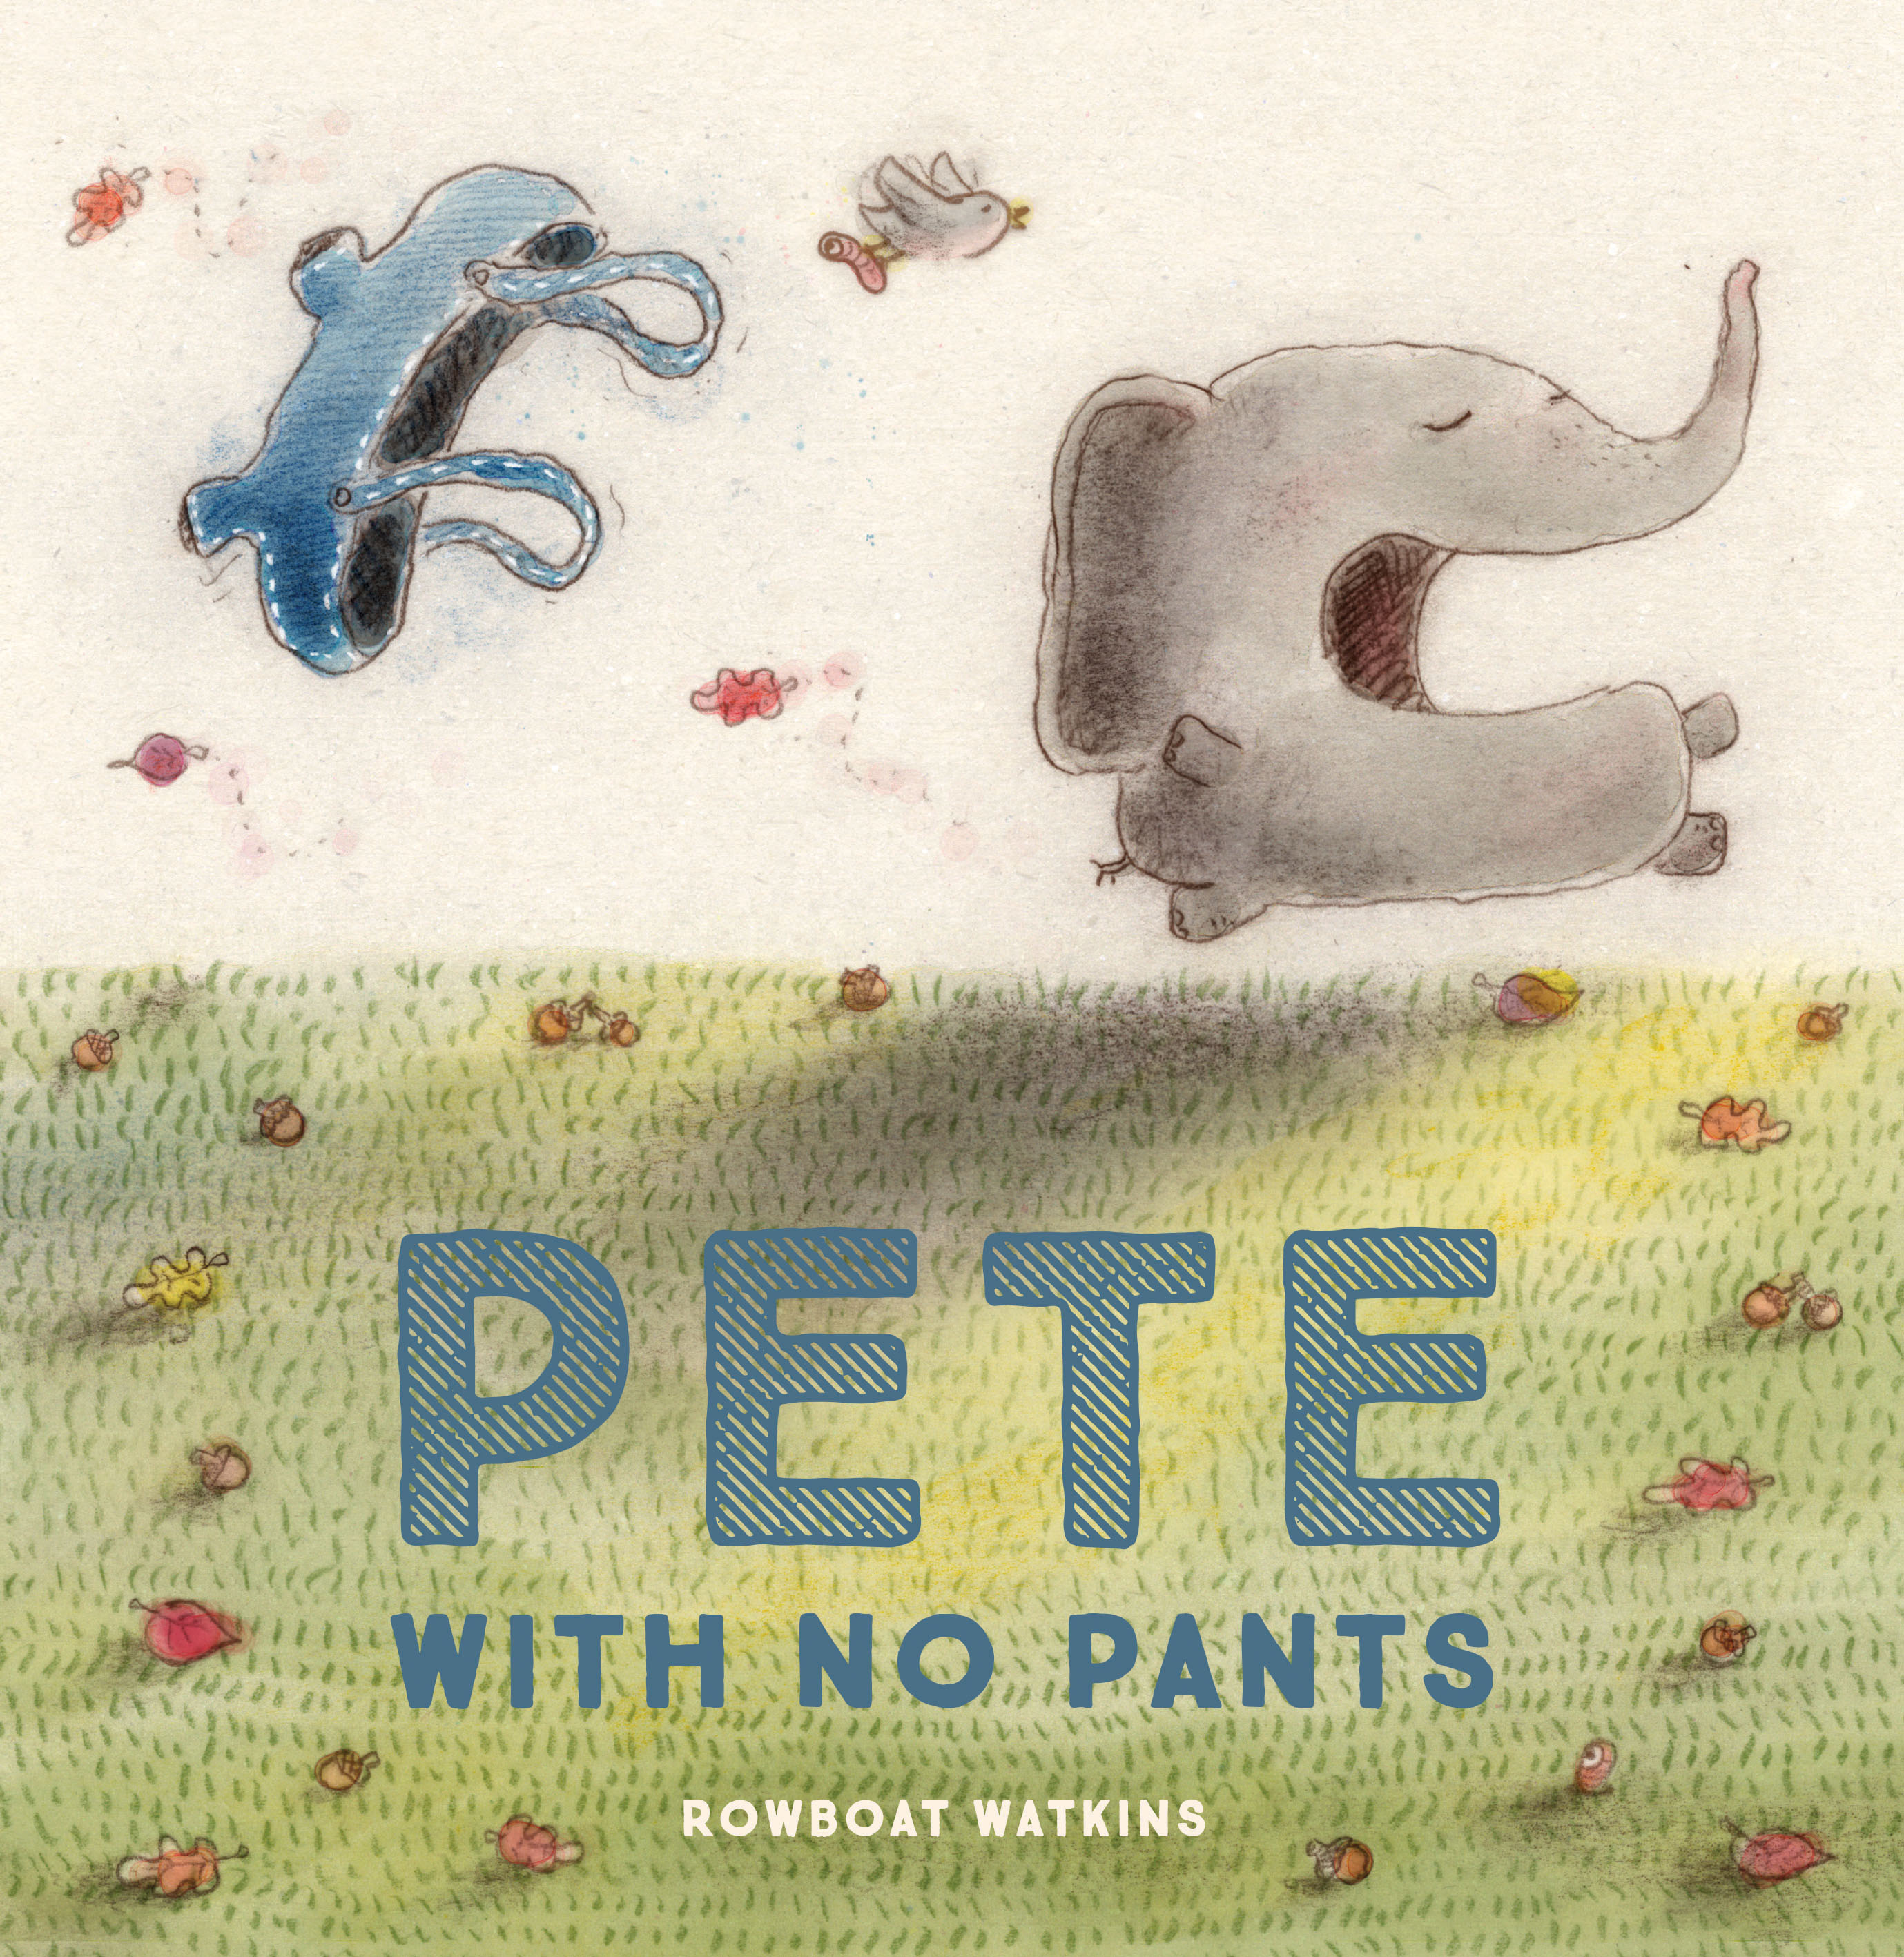 Sunday Story Time with Rowboat Watkins (Author & Illustrator of Pete with No Pants)